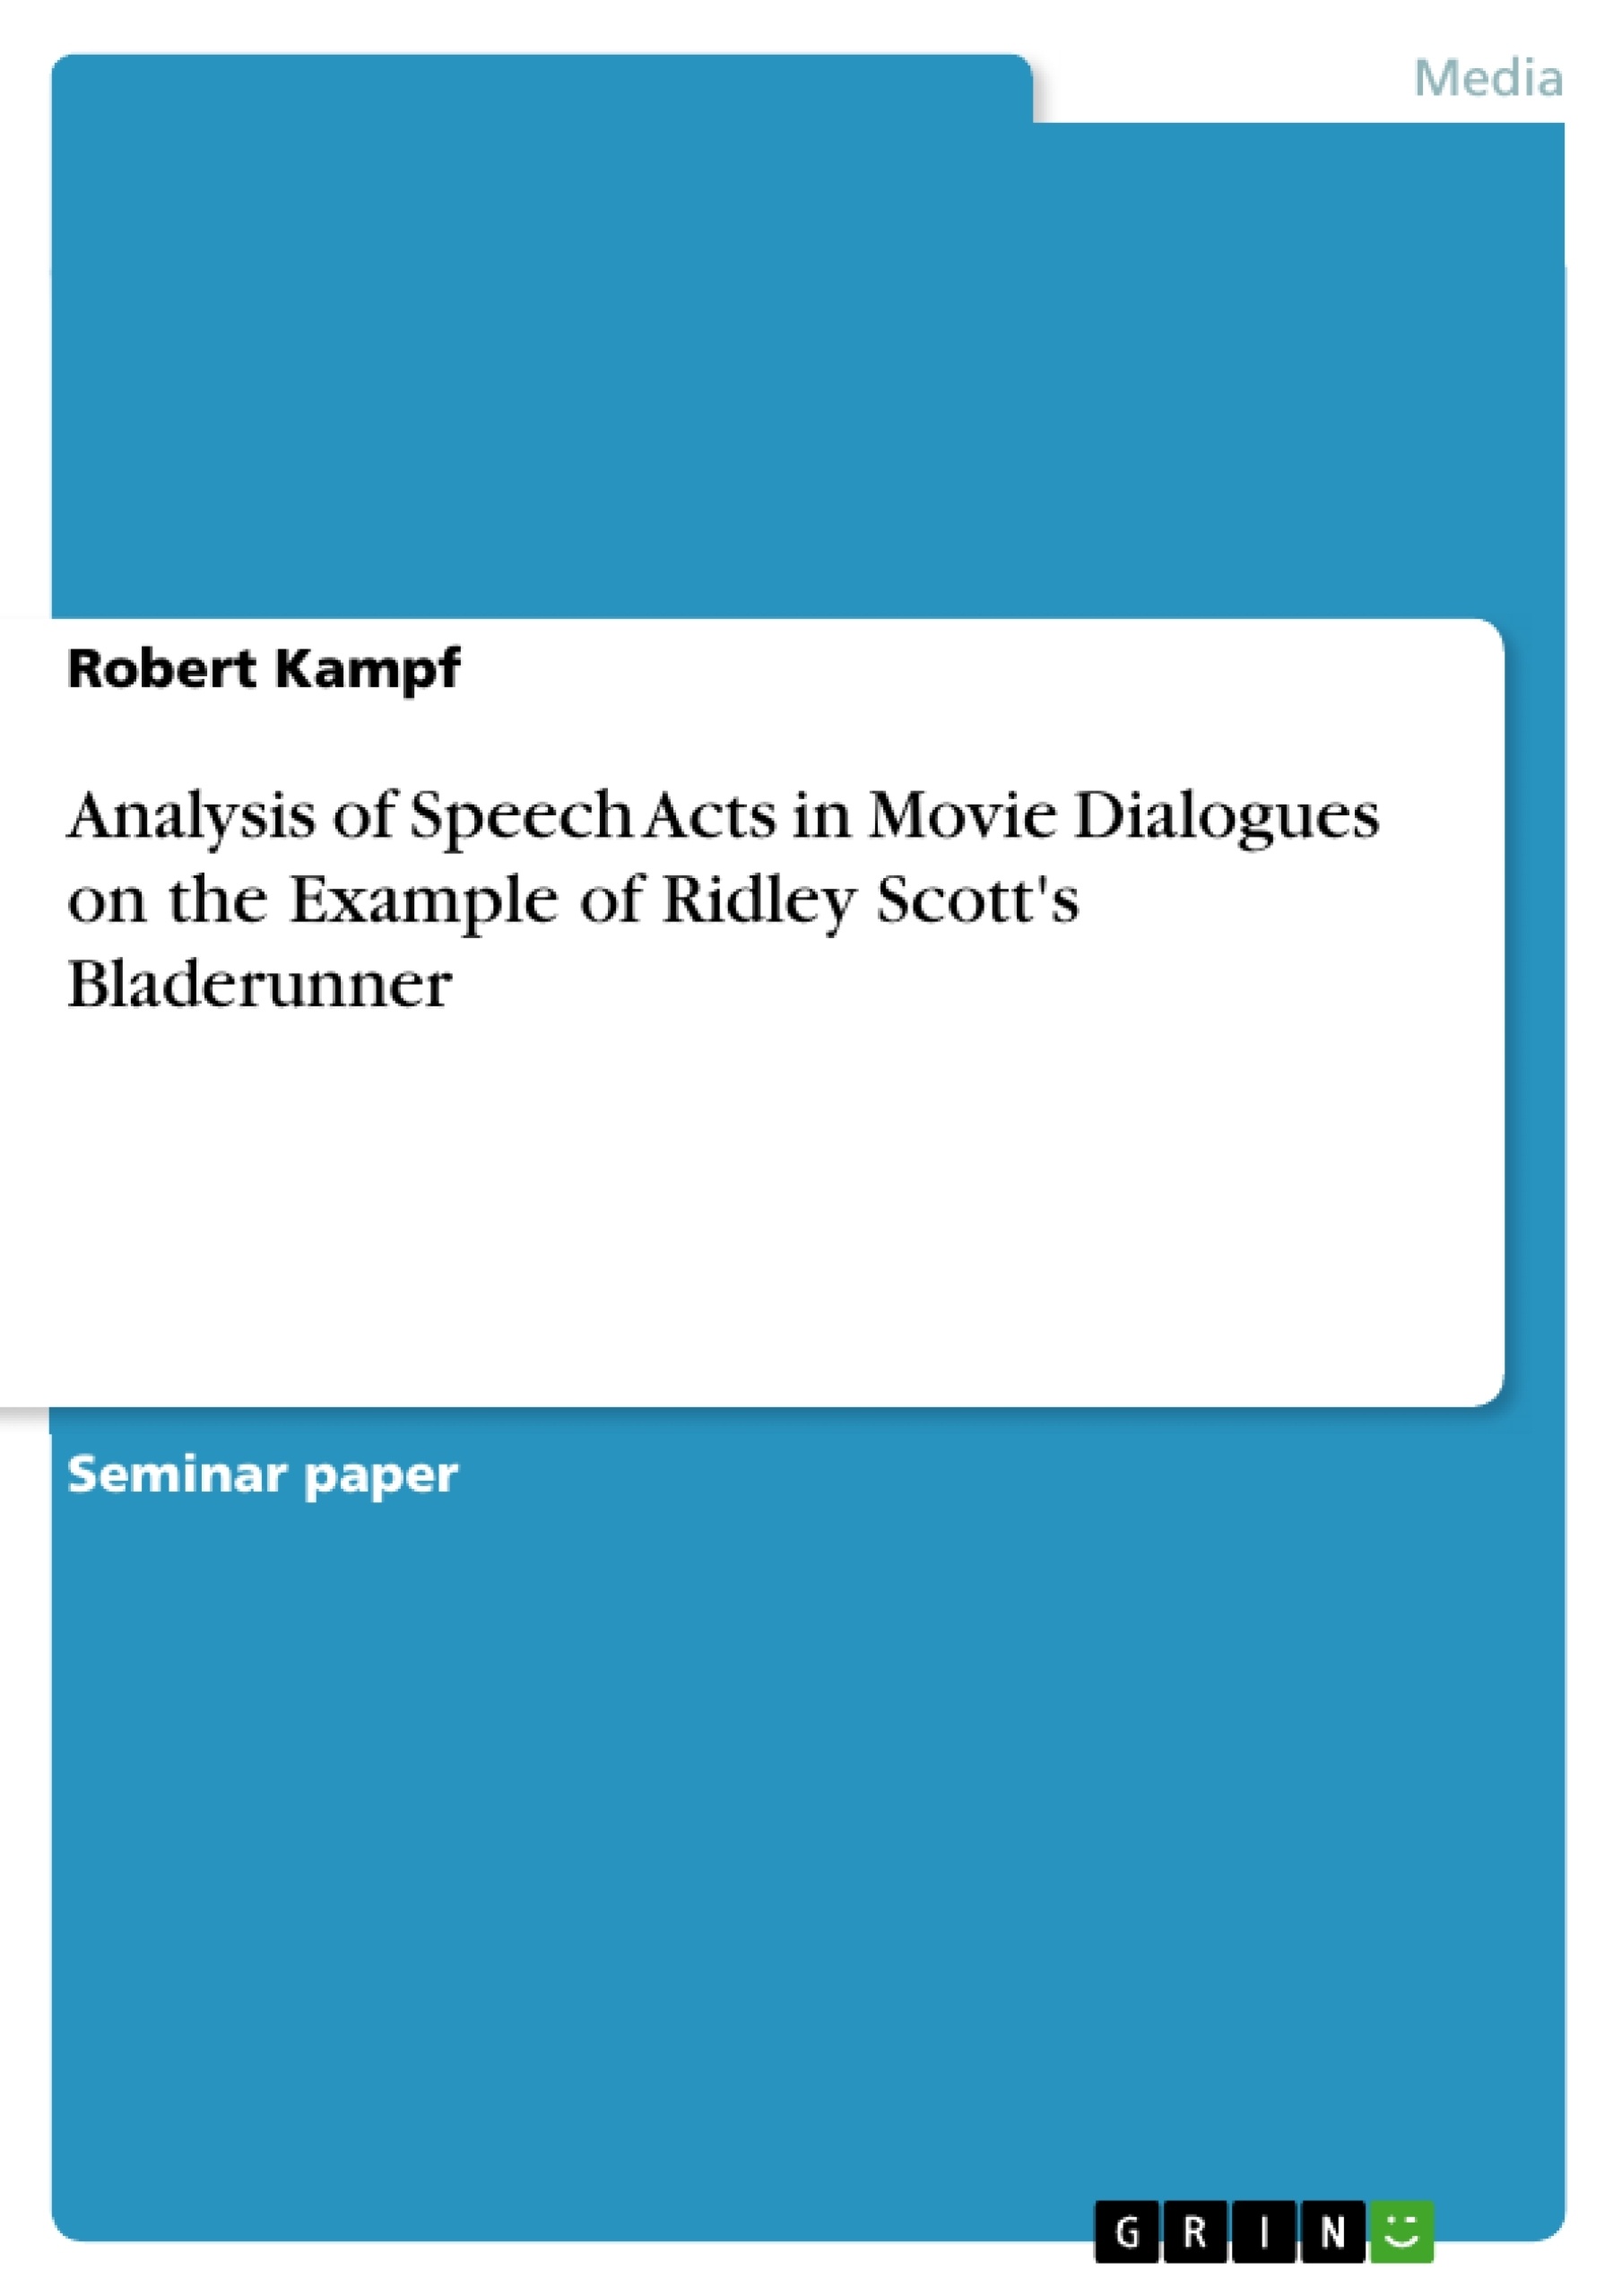 Title: Analysis of Speech Acts in Movie Dialogues on the Example of Ridley Scott's Bladerunner